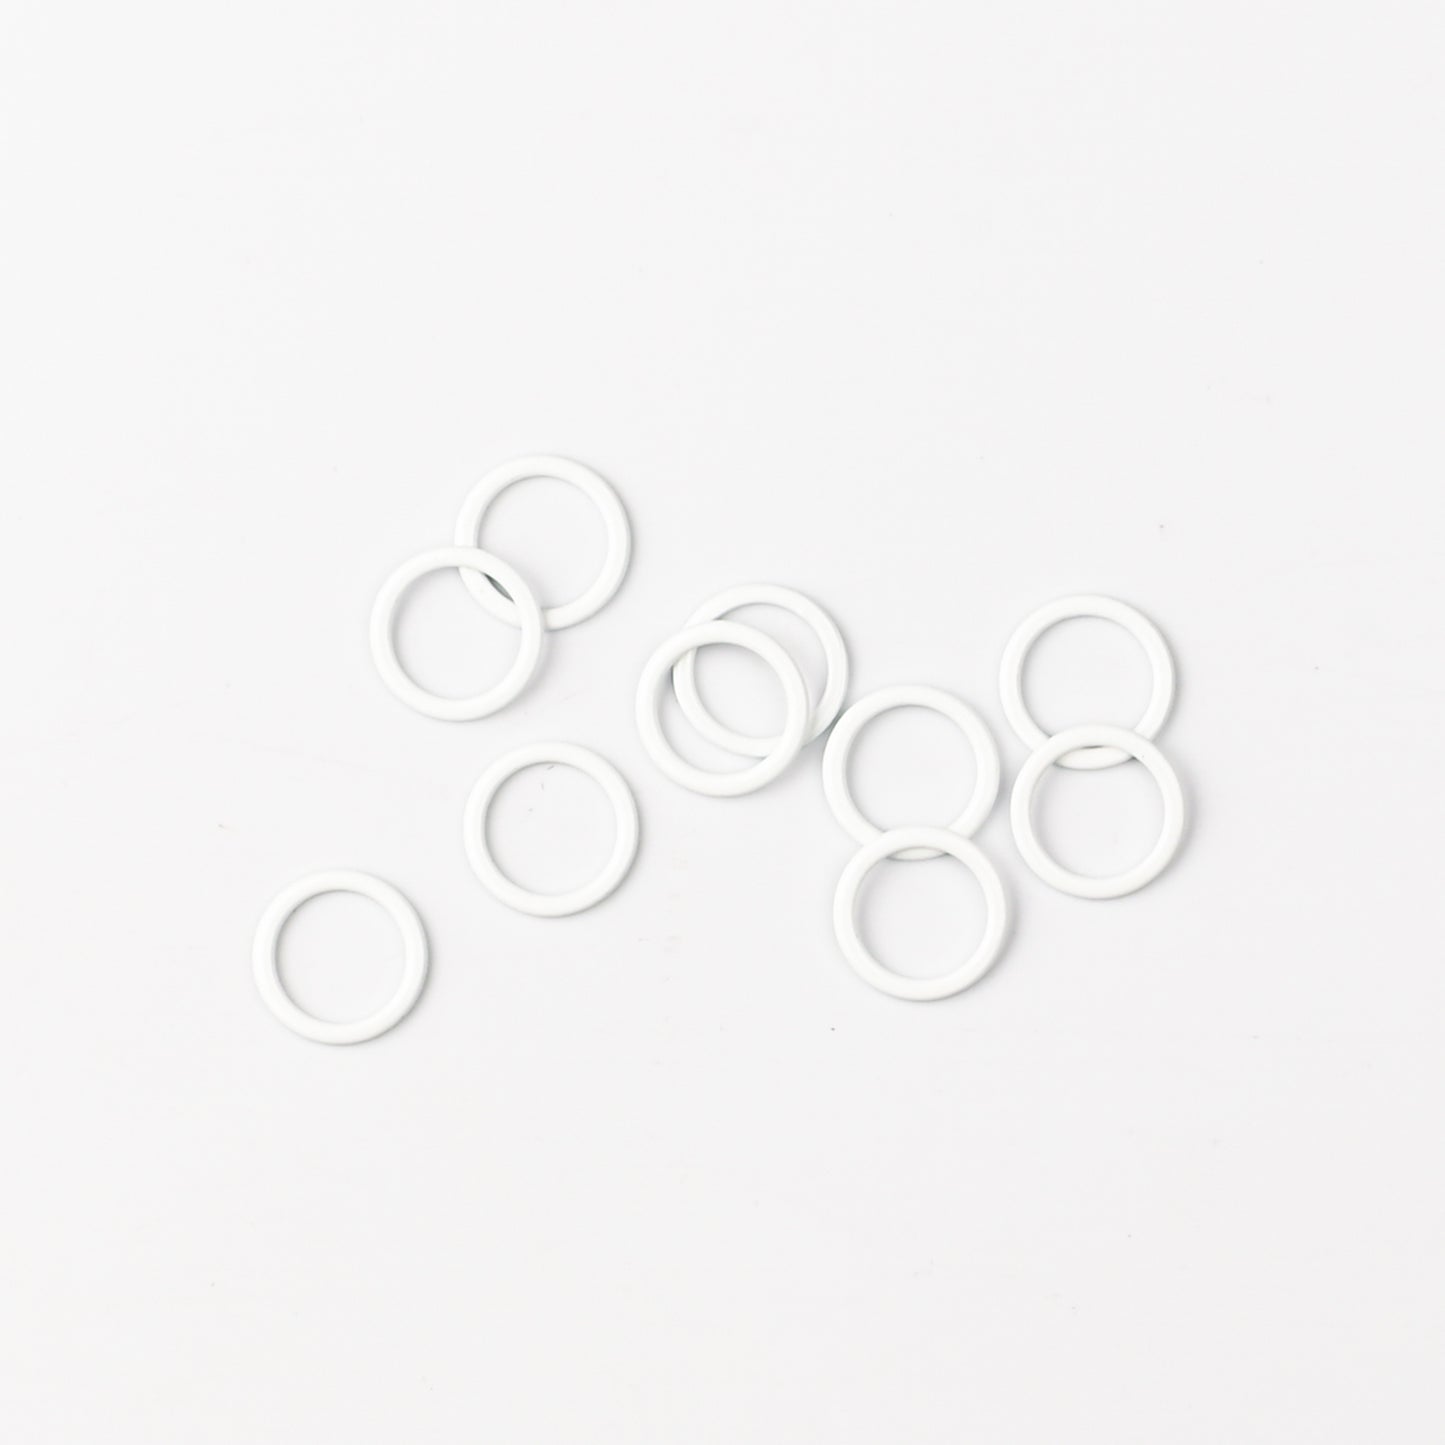 Bra Accessories Circles  10mm Black & White - TO BE DISCONTINUED